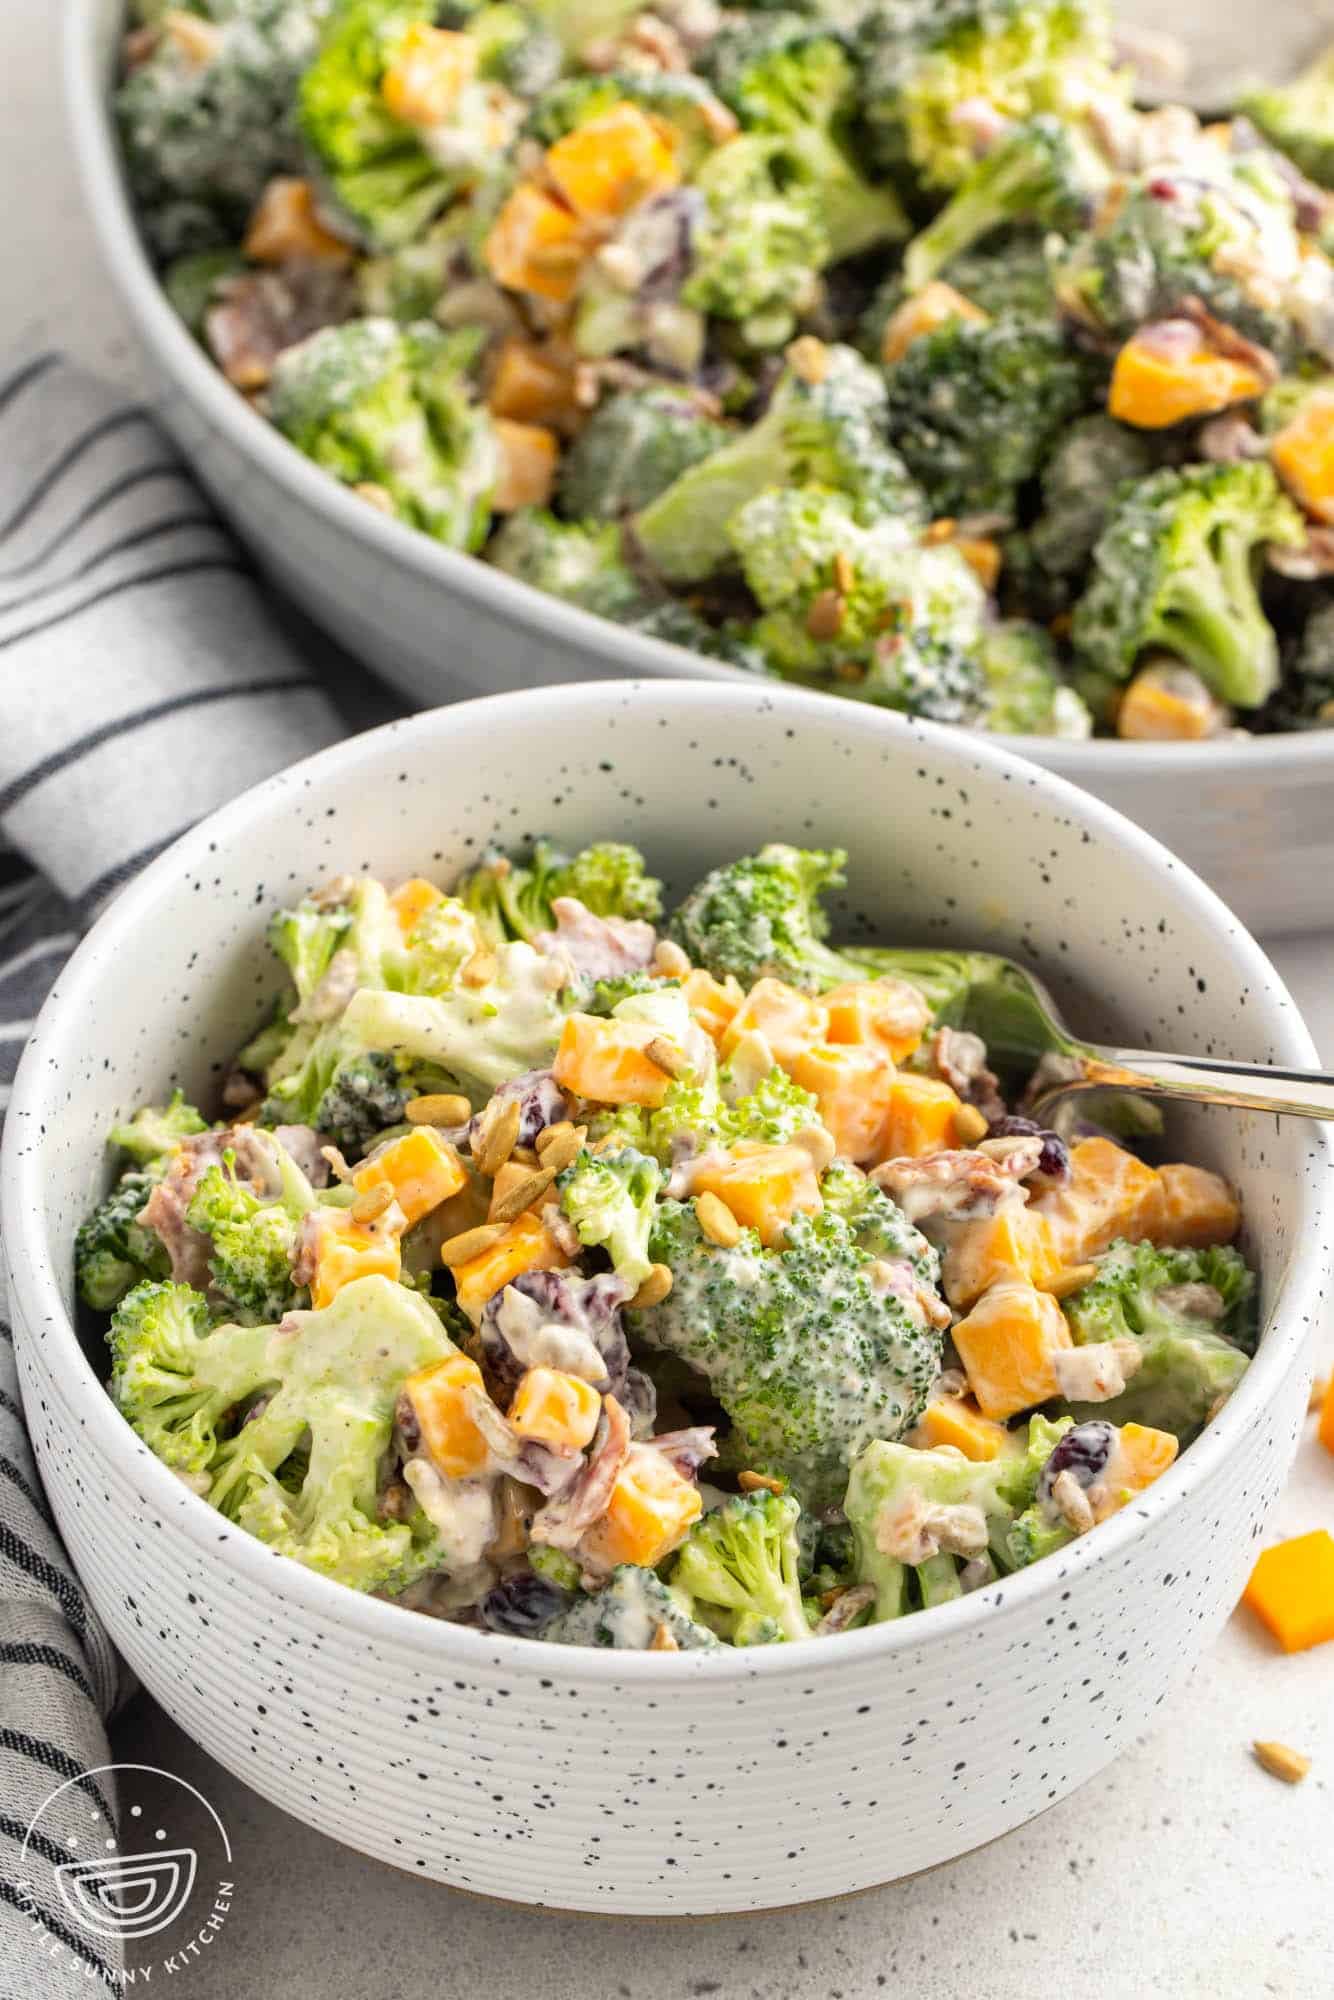 A small bowl of broccoli salad with cheese and a creamy dressing.